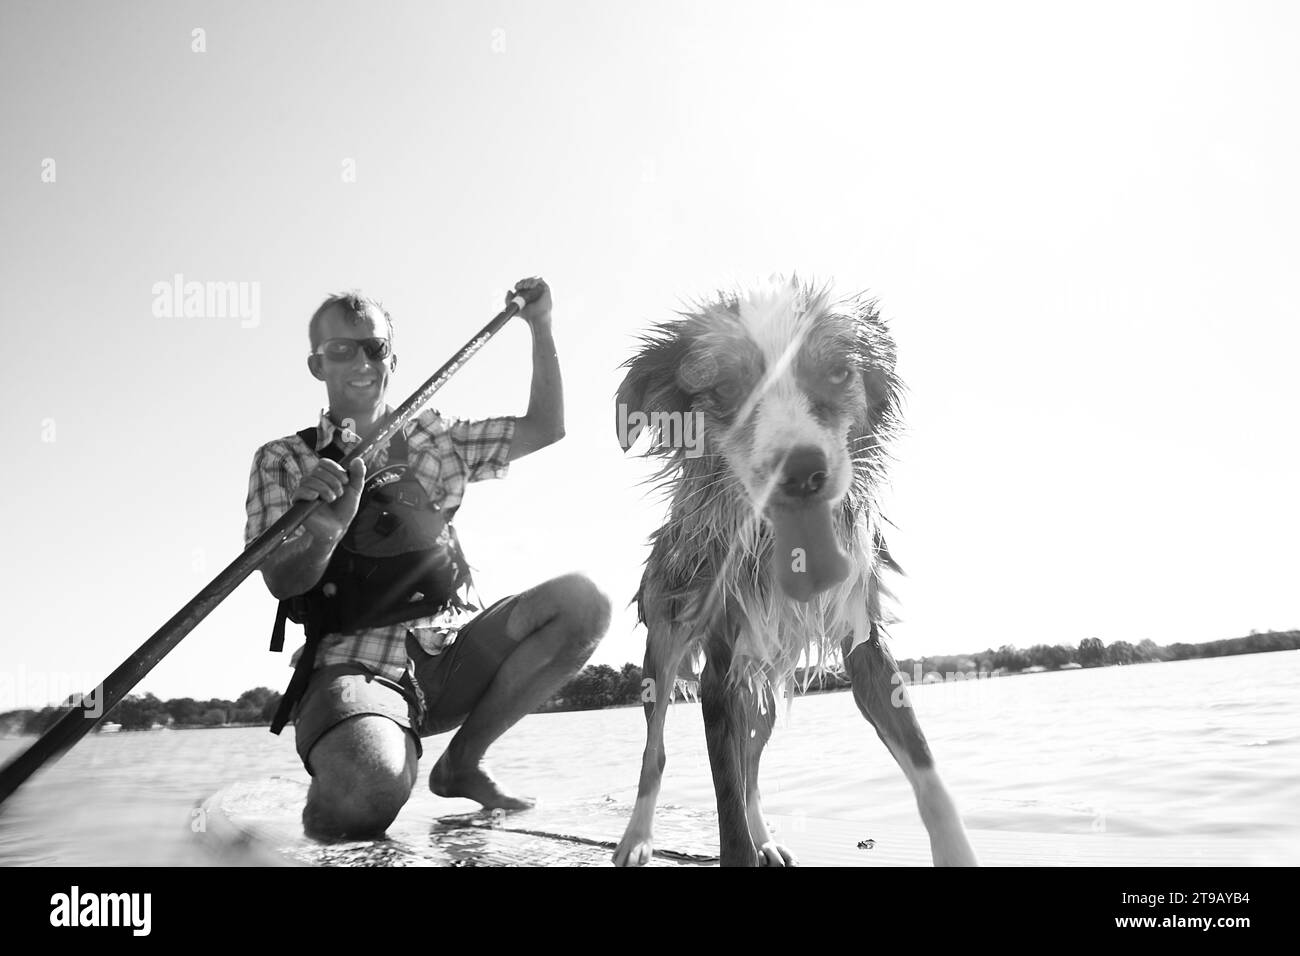 Black and white low angle perspective of a man stand up paddleboarding (SUP) with his wet and funny looking dog against a blown out sky. Stock Photo